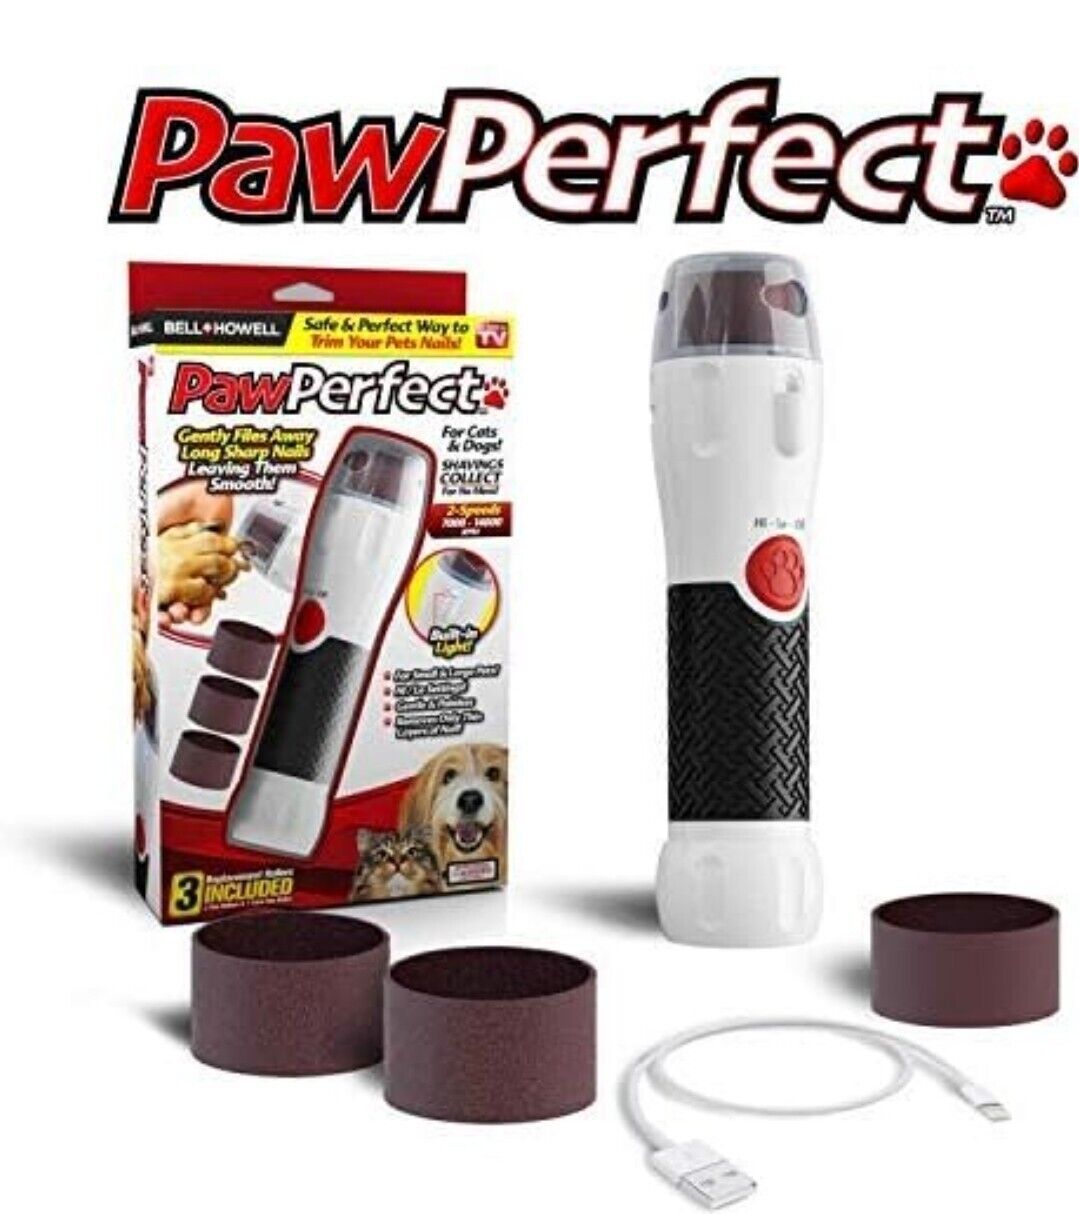 Bell+Howell 2337 PawPerfect Pet Nail Trimmer Bell + Howell 2337